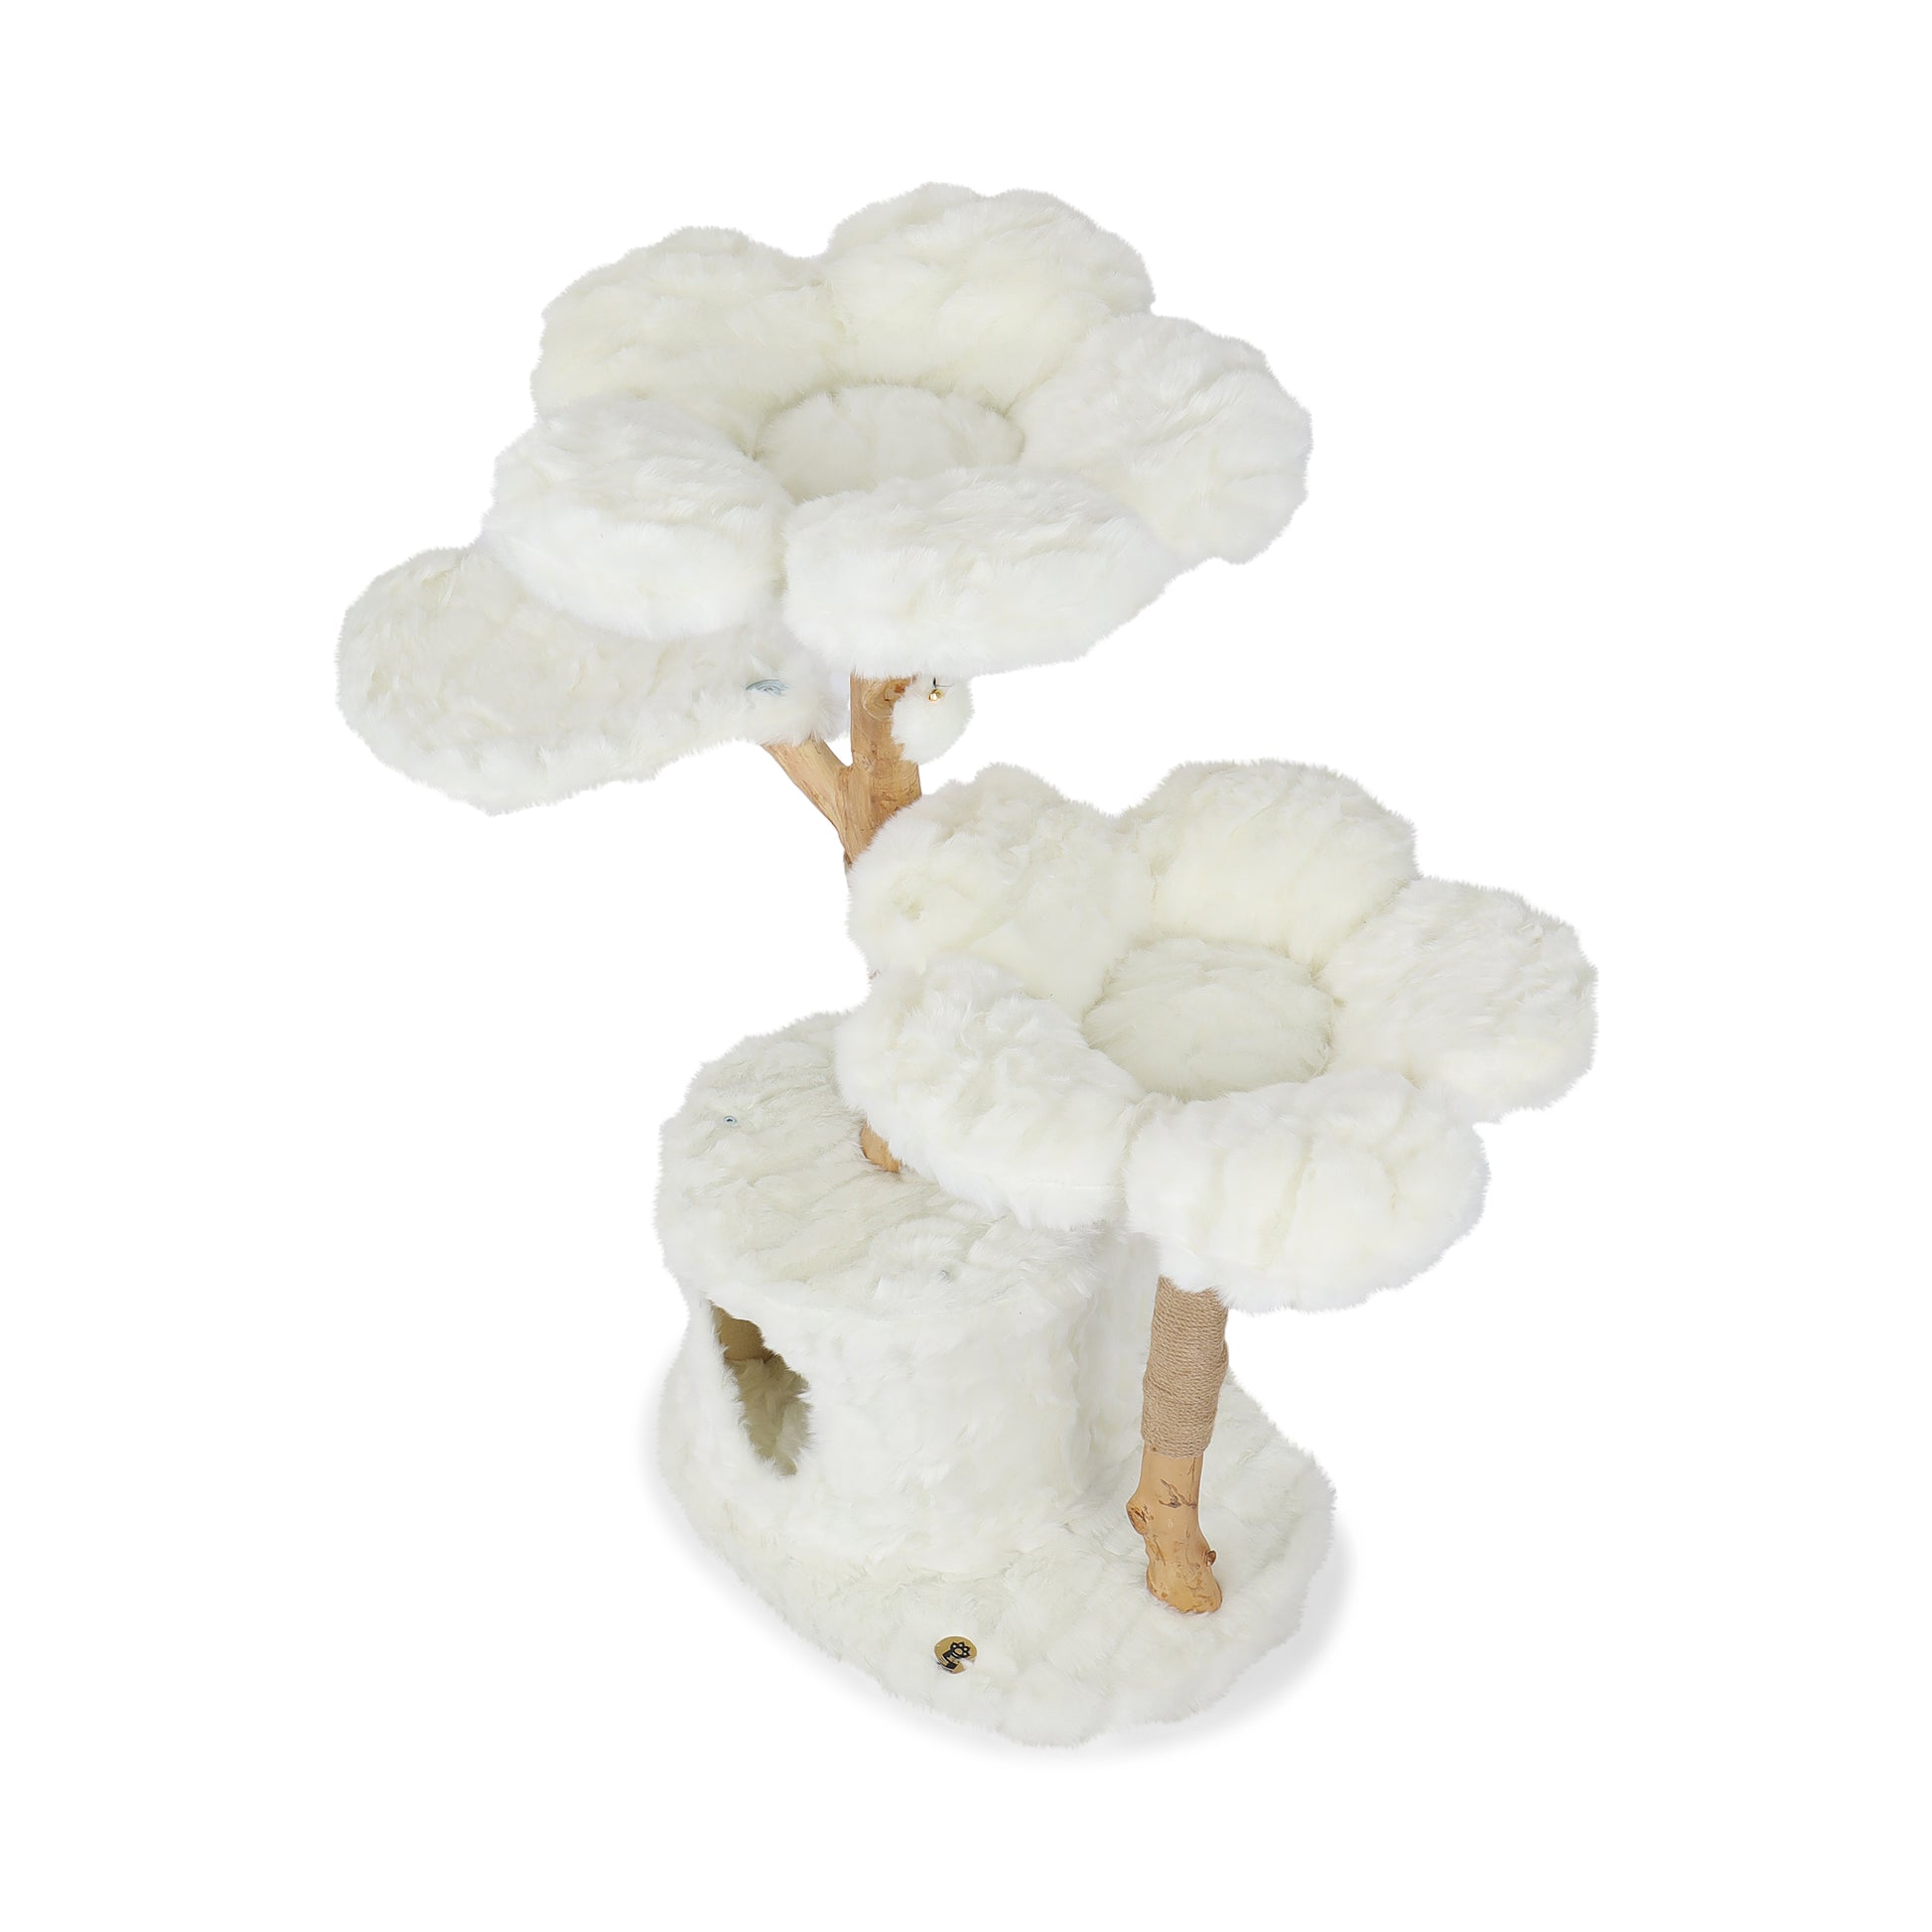 A white flower with a wooden stand floral cat tree